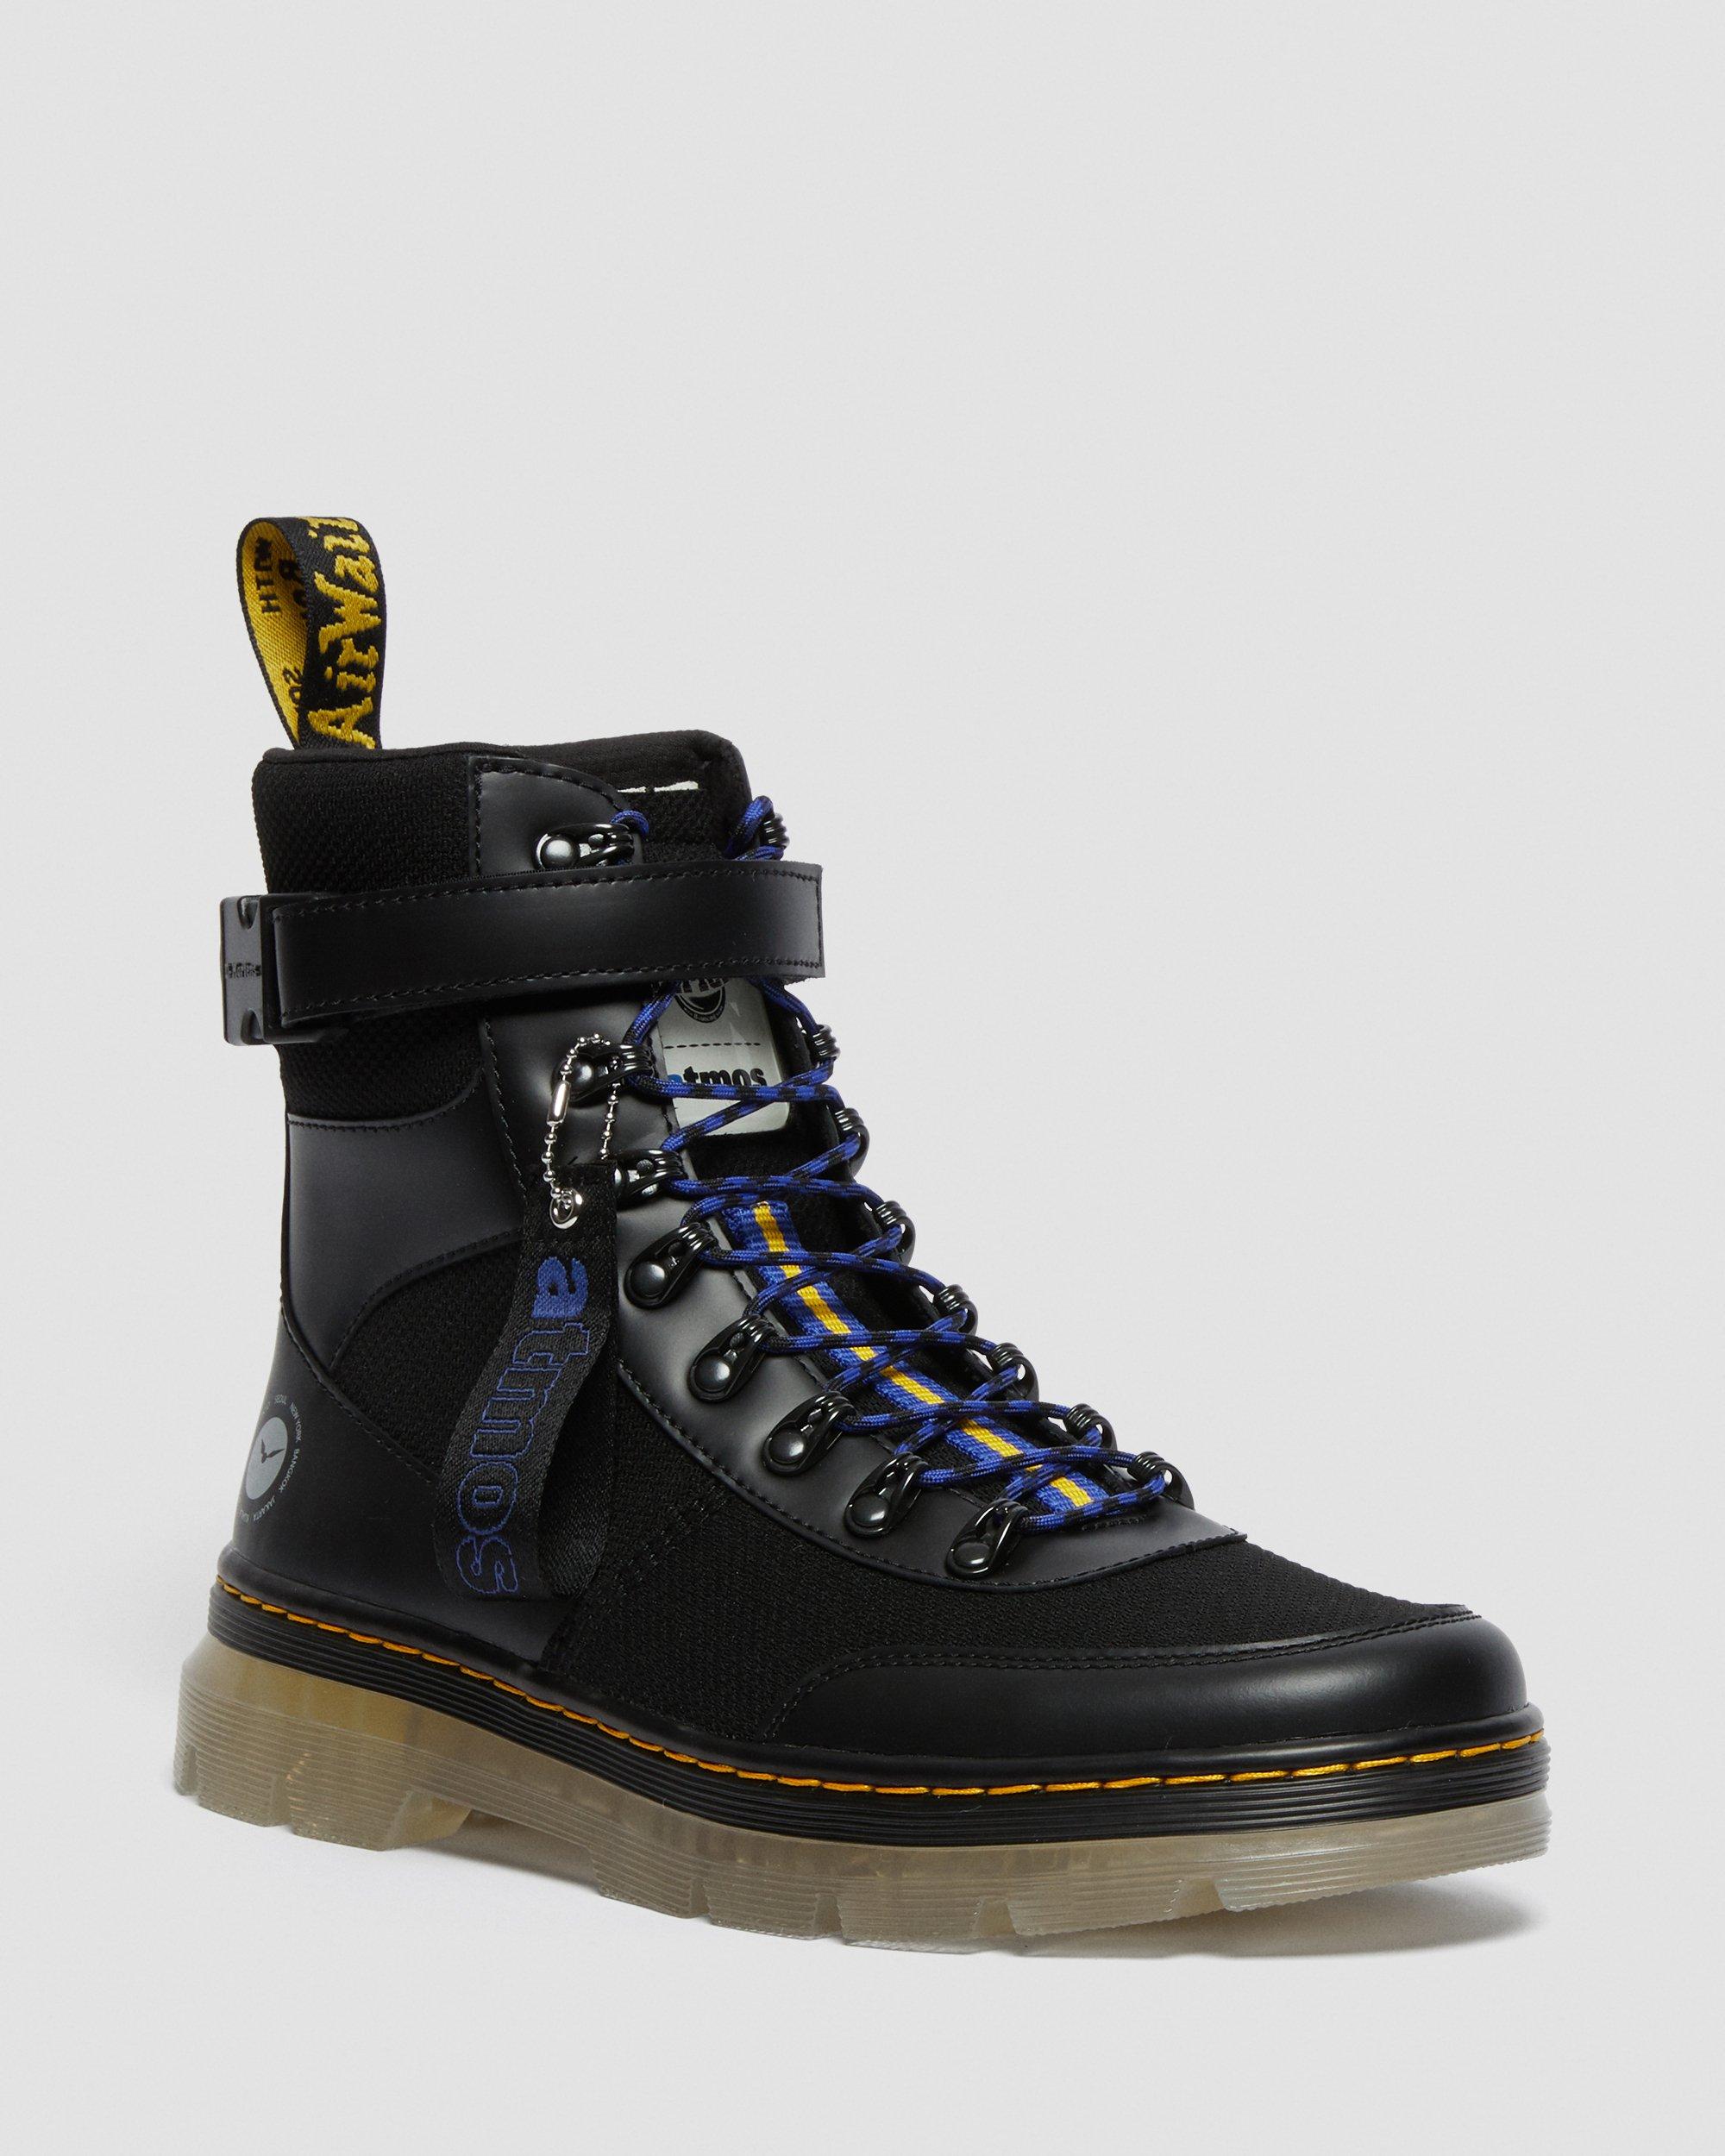 Combs Tech Atmos Casual Boots in Black | Dr. Martens